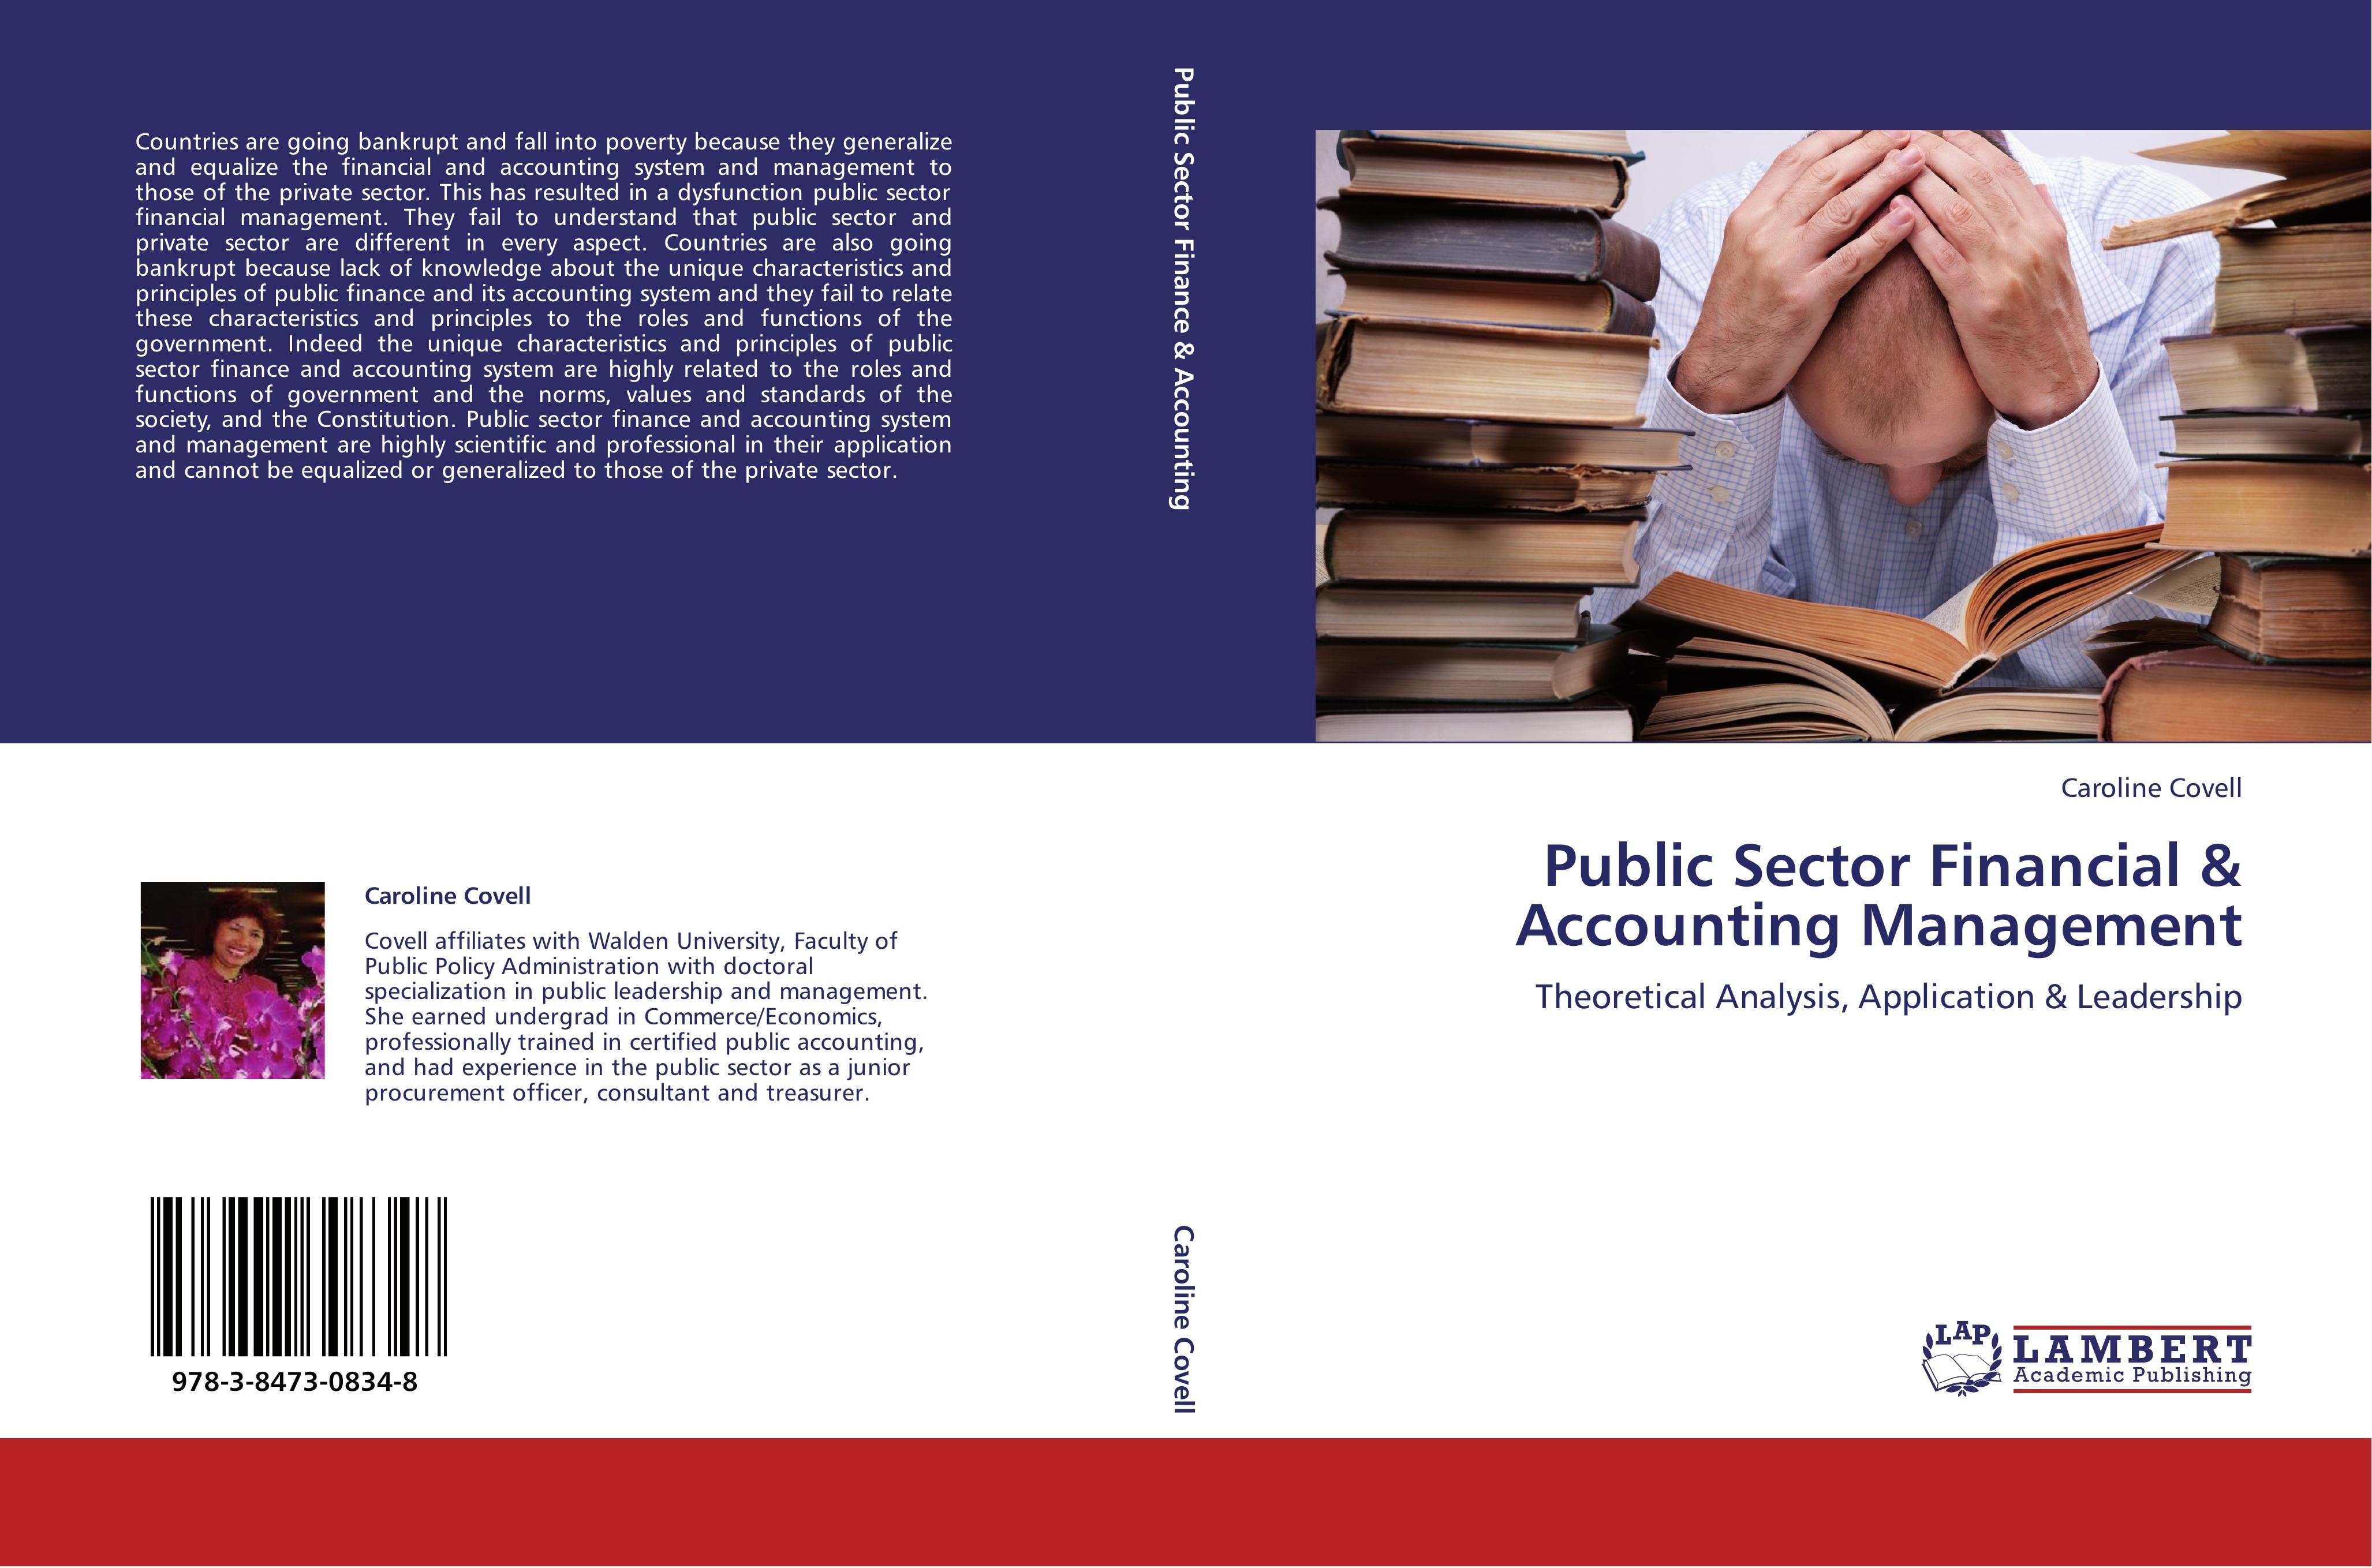 Public Sector Financial & Accounting Management - Caroline Covell